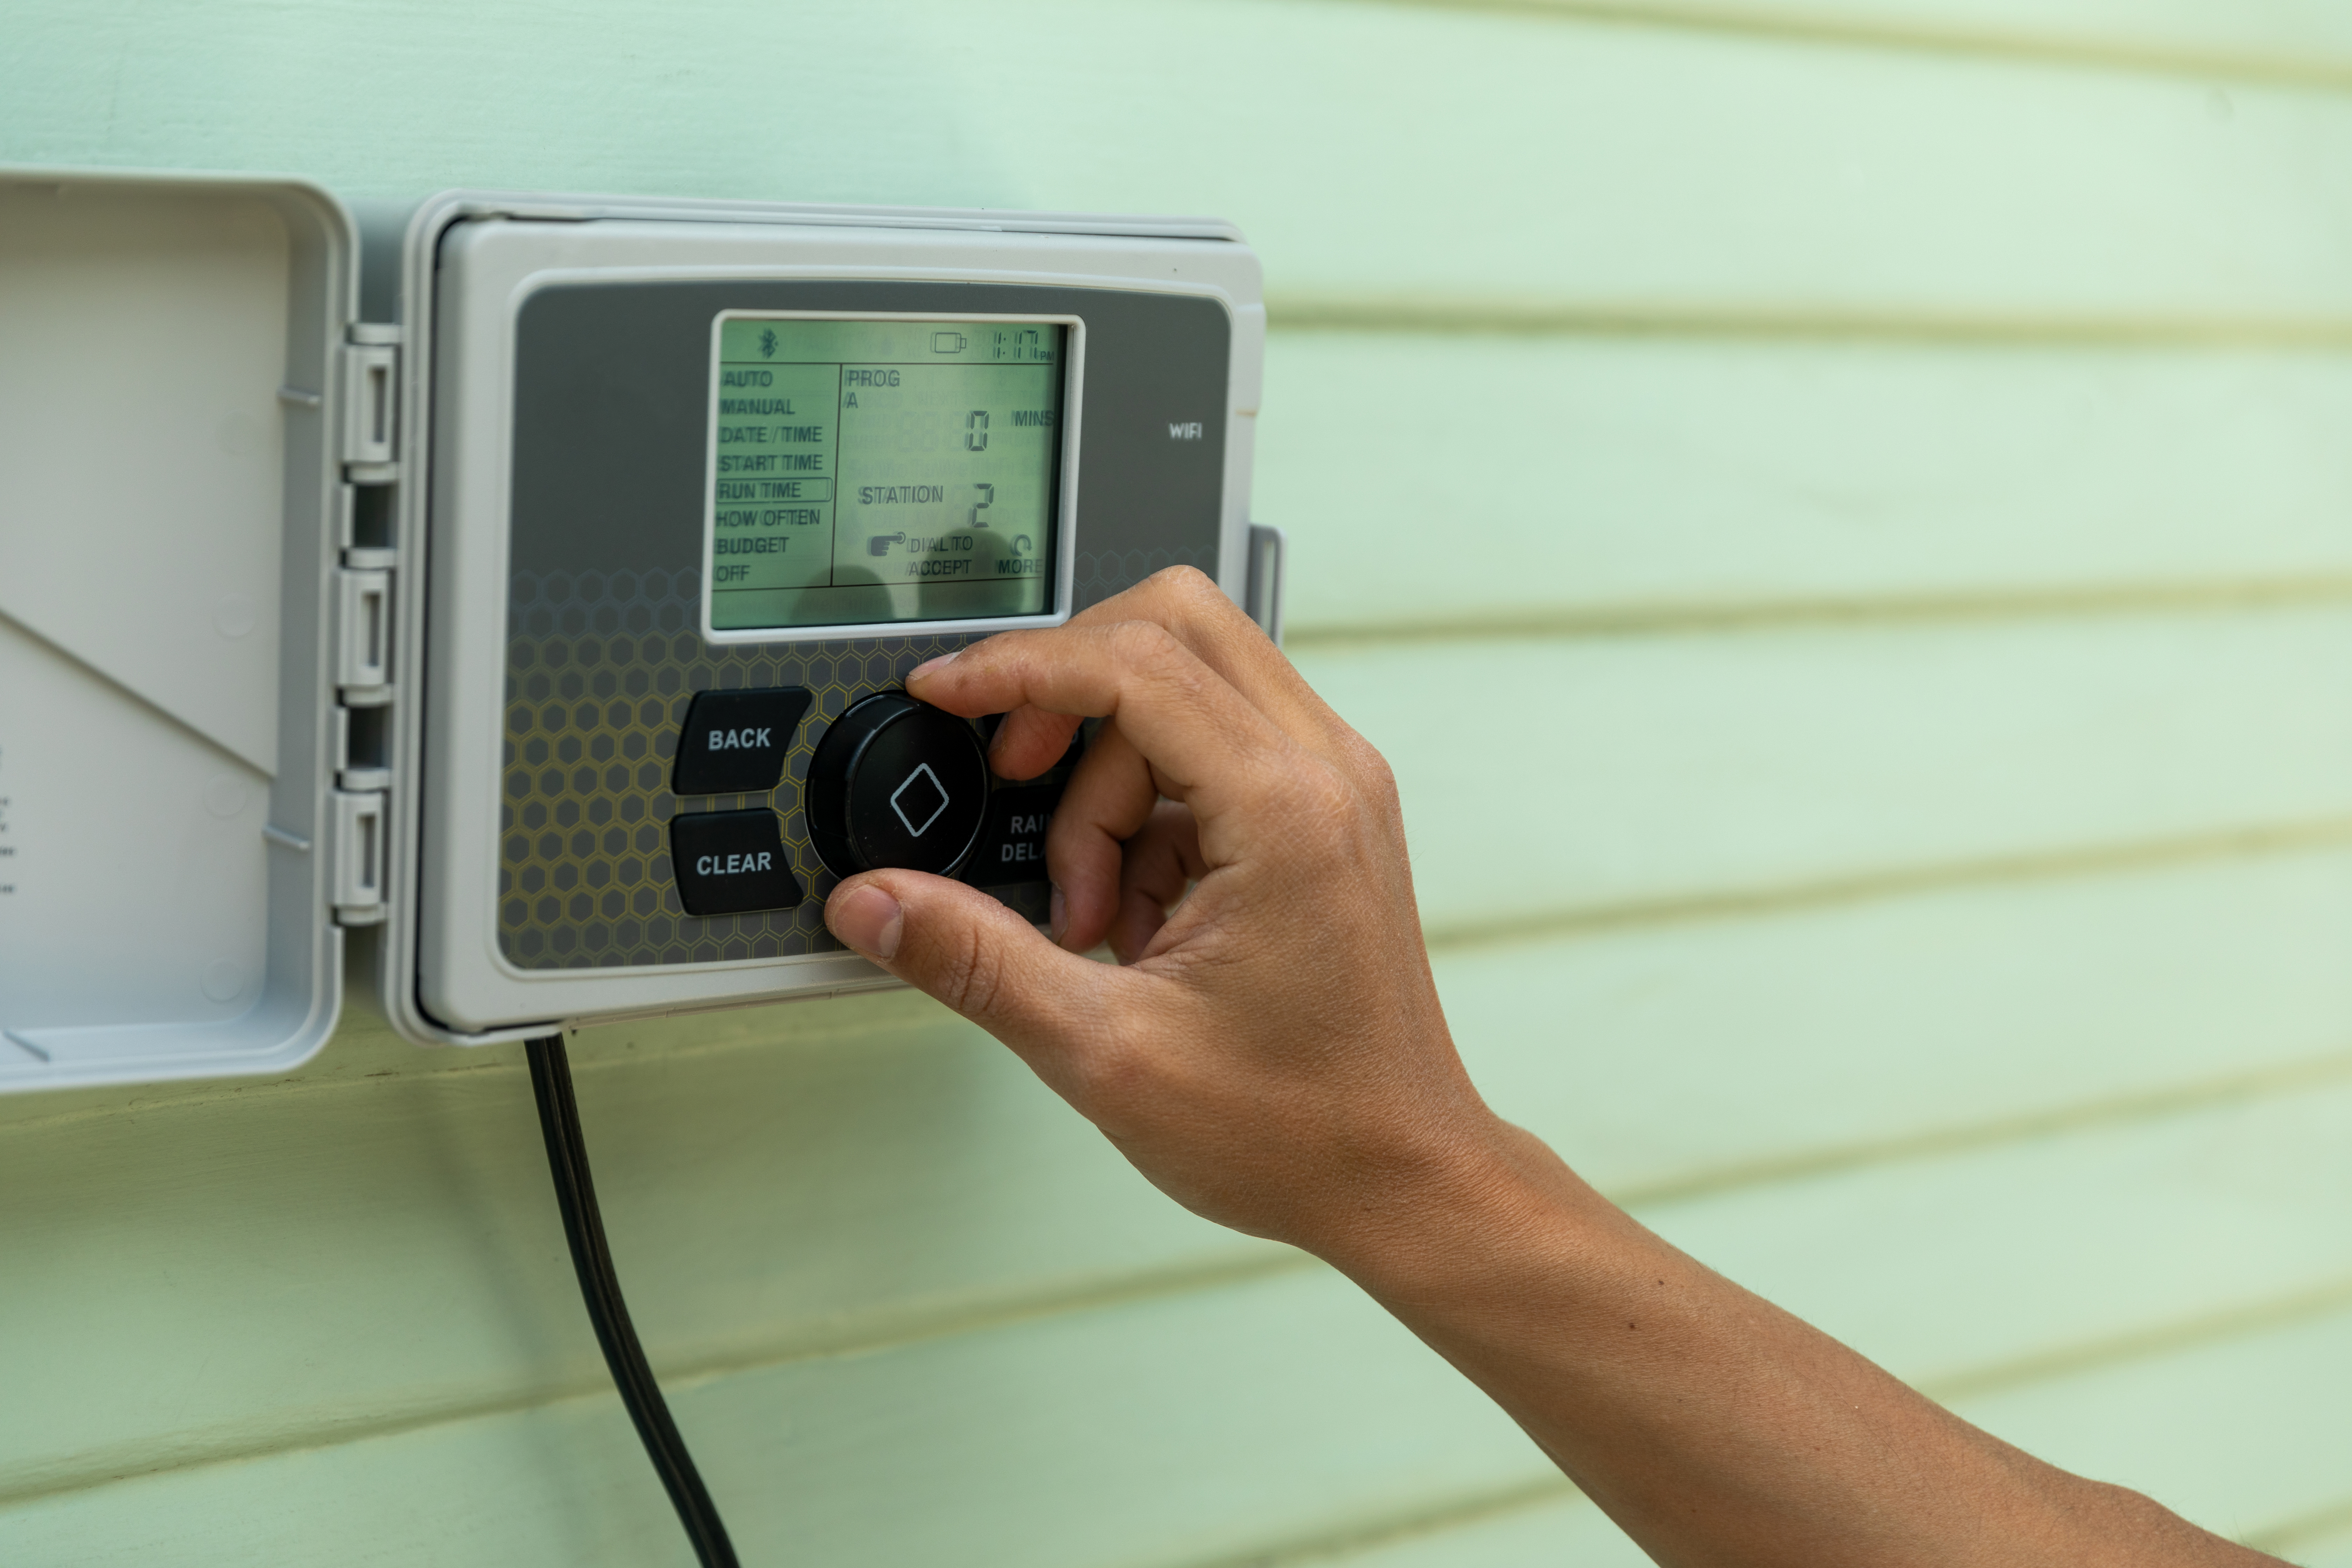 A person adjusts a smart sprinkler controller provided as a part of a water conservation program